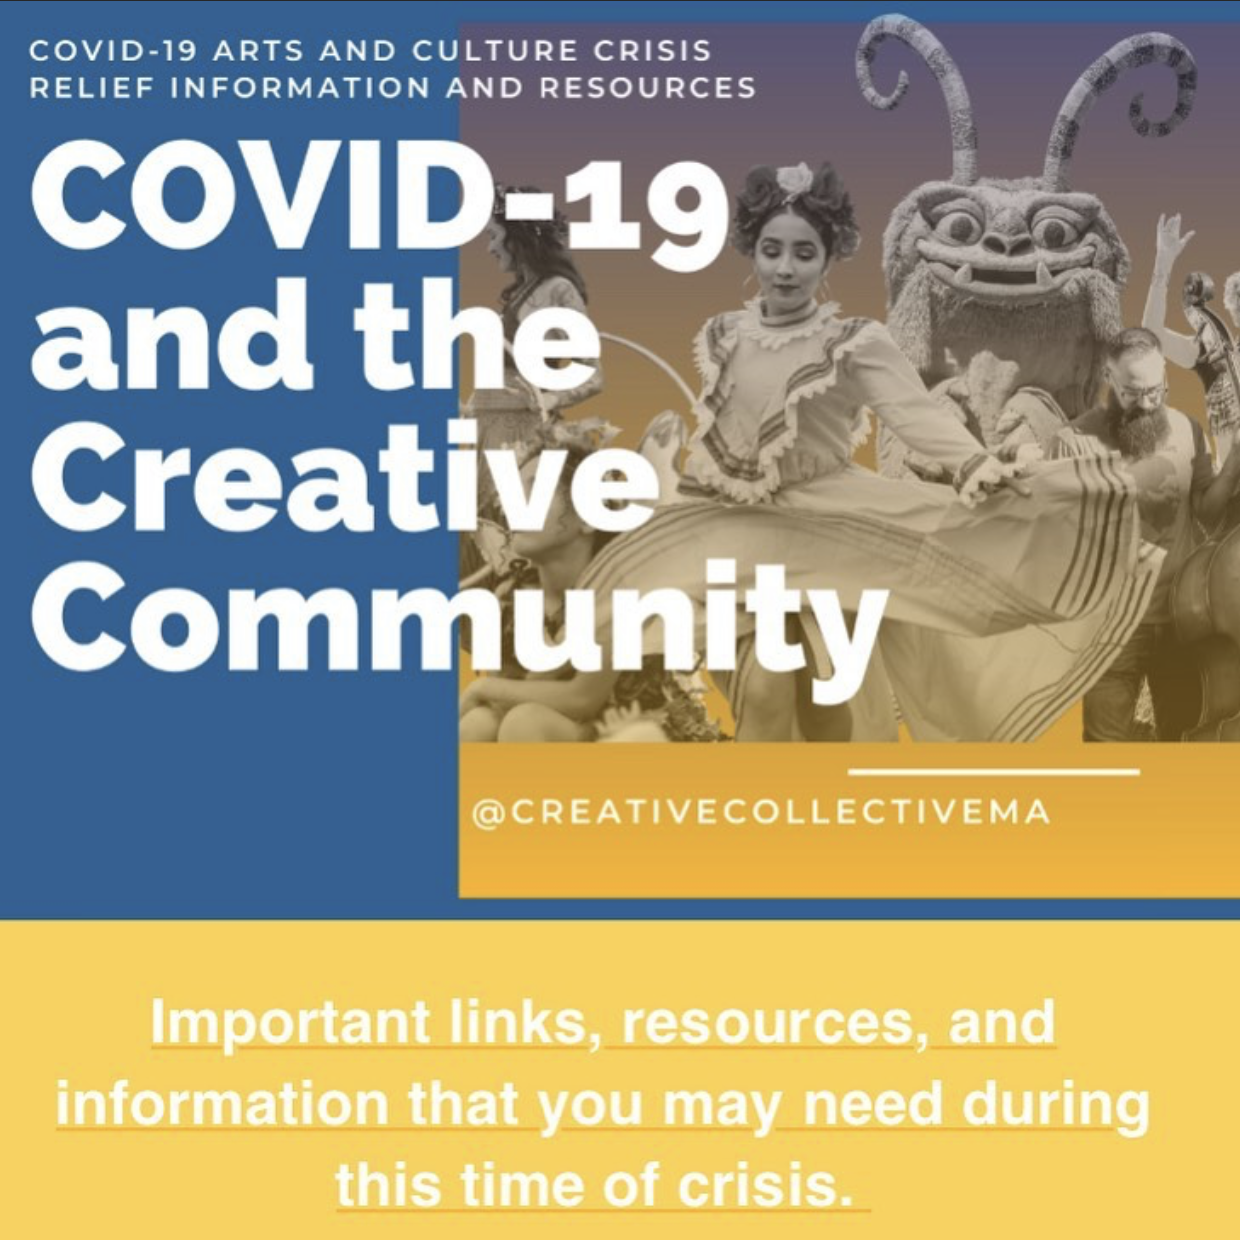 COVID-19 RESOURCE AND INFO PAGE FOR CREATIVE INDUSTRIES